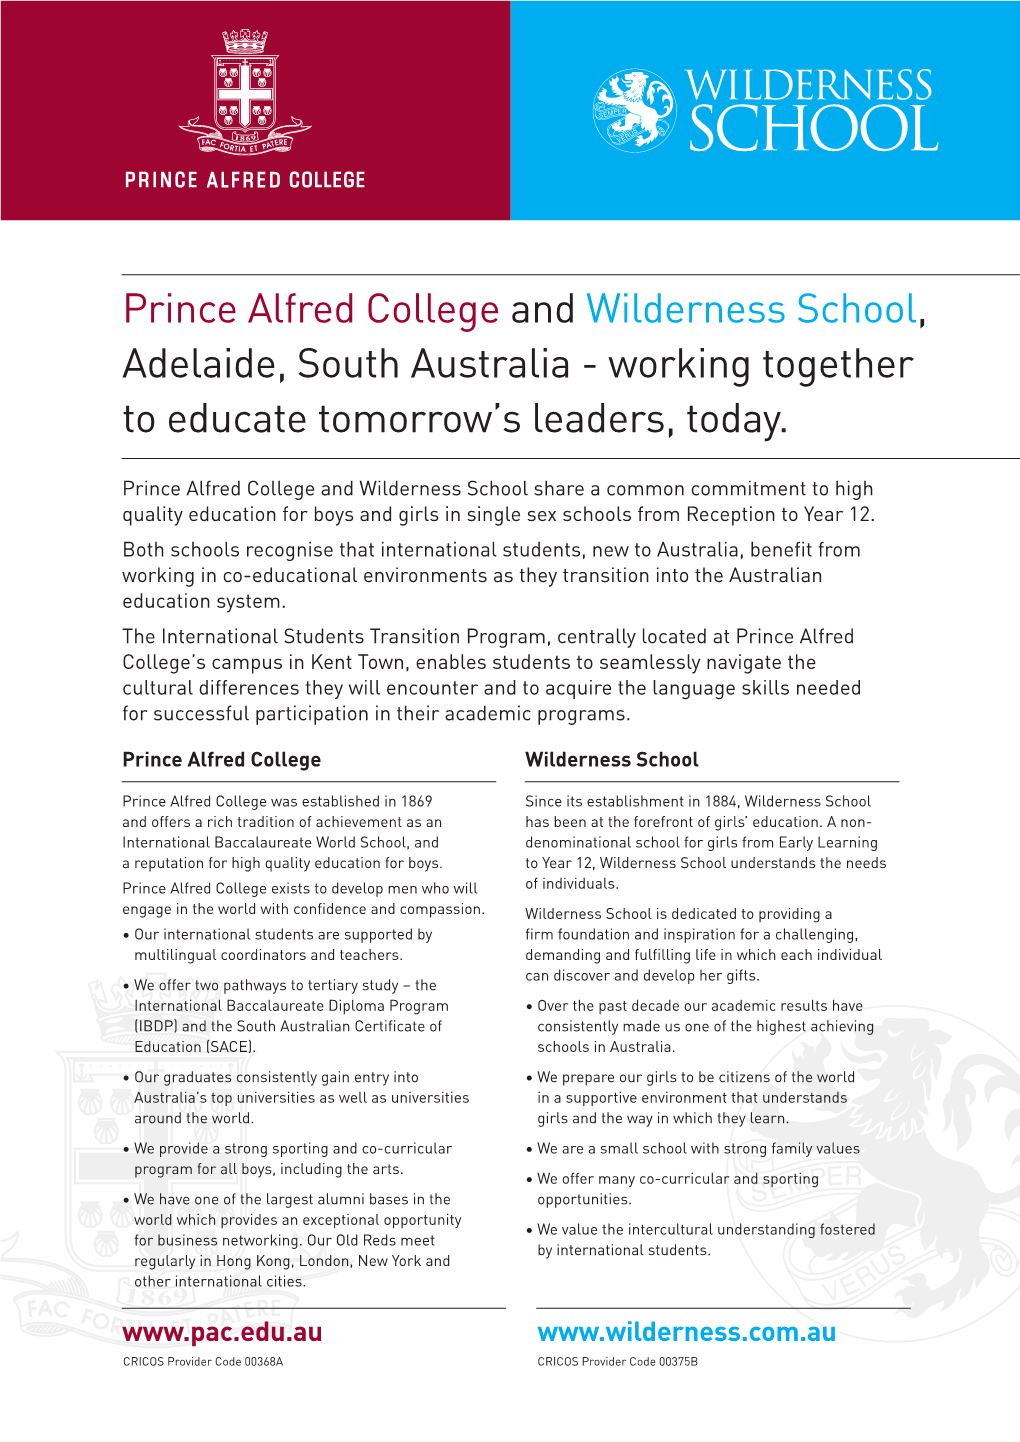 Prince Alfred College and Wilderness School, Adelaide, South Australia - Working Together to Educate Tomorrow’S Leaders, Today